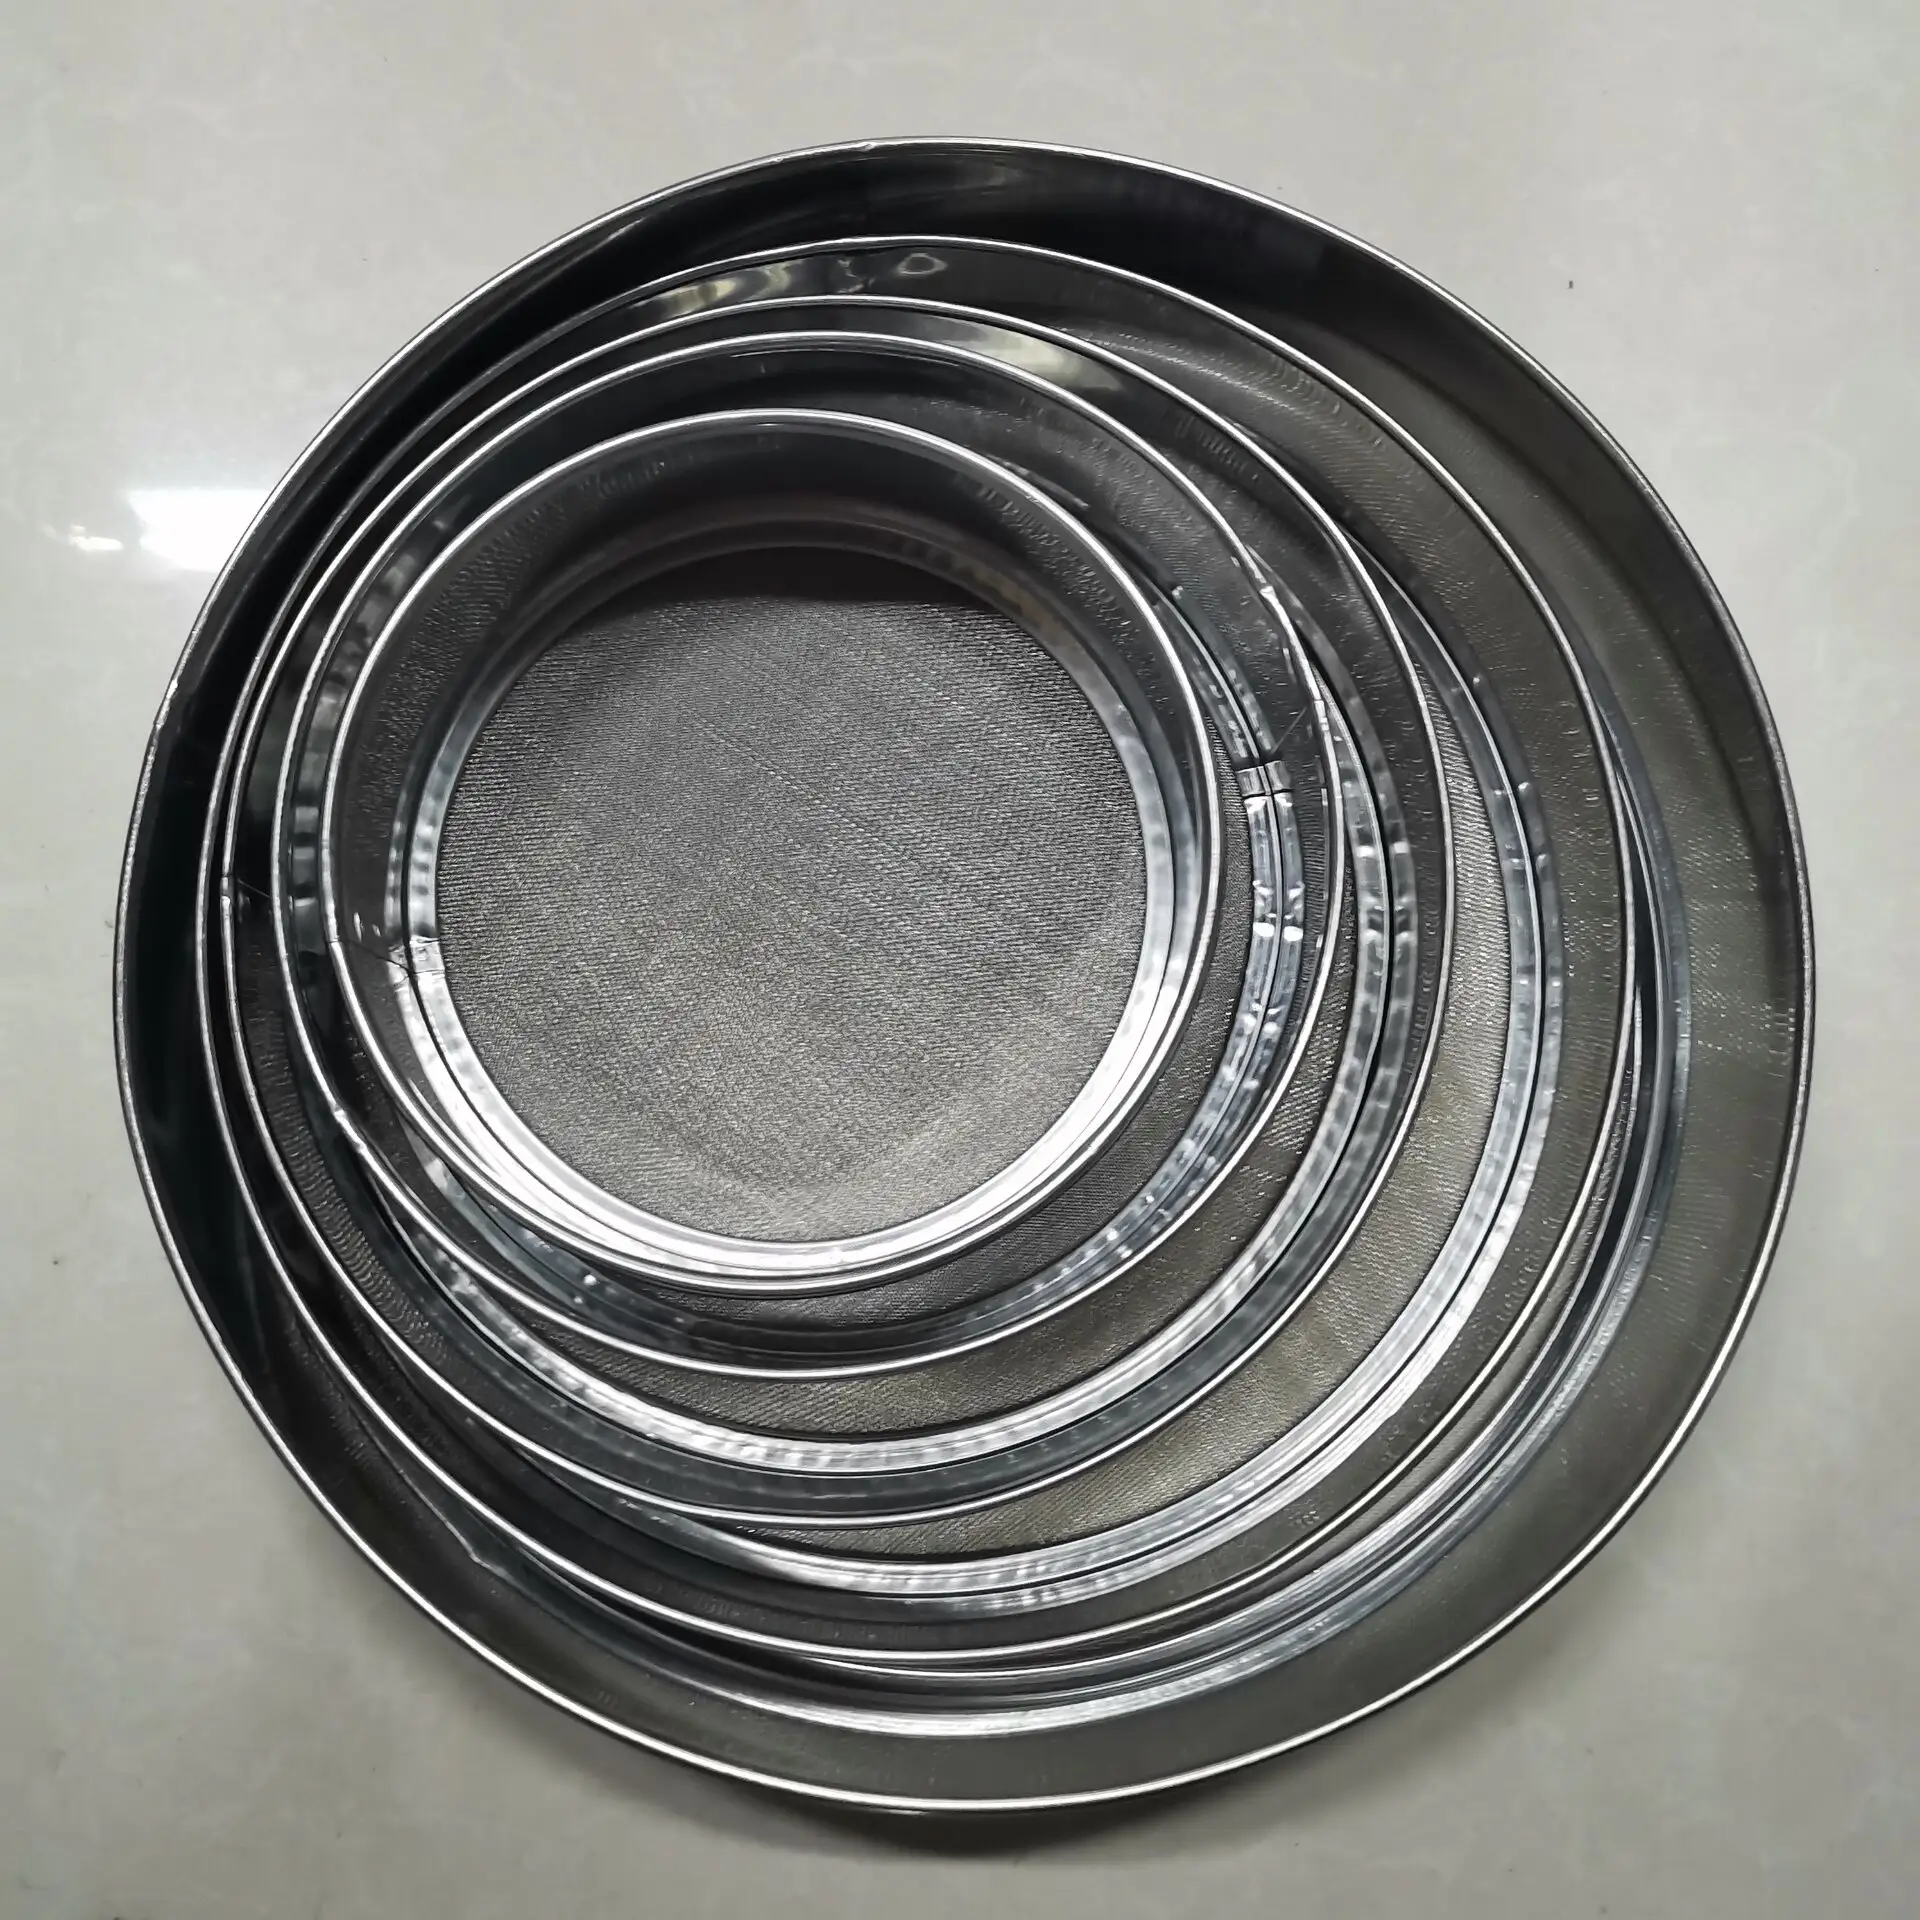 20 45 75 300 425 micron 20 mesh 304 food grade stainless steel wire mesh double layers rice filter standard test sieve